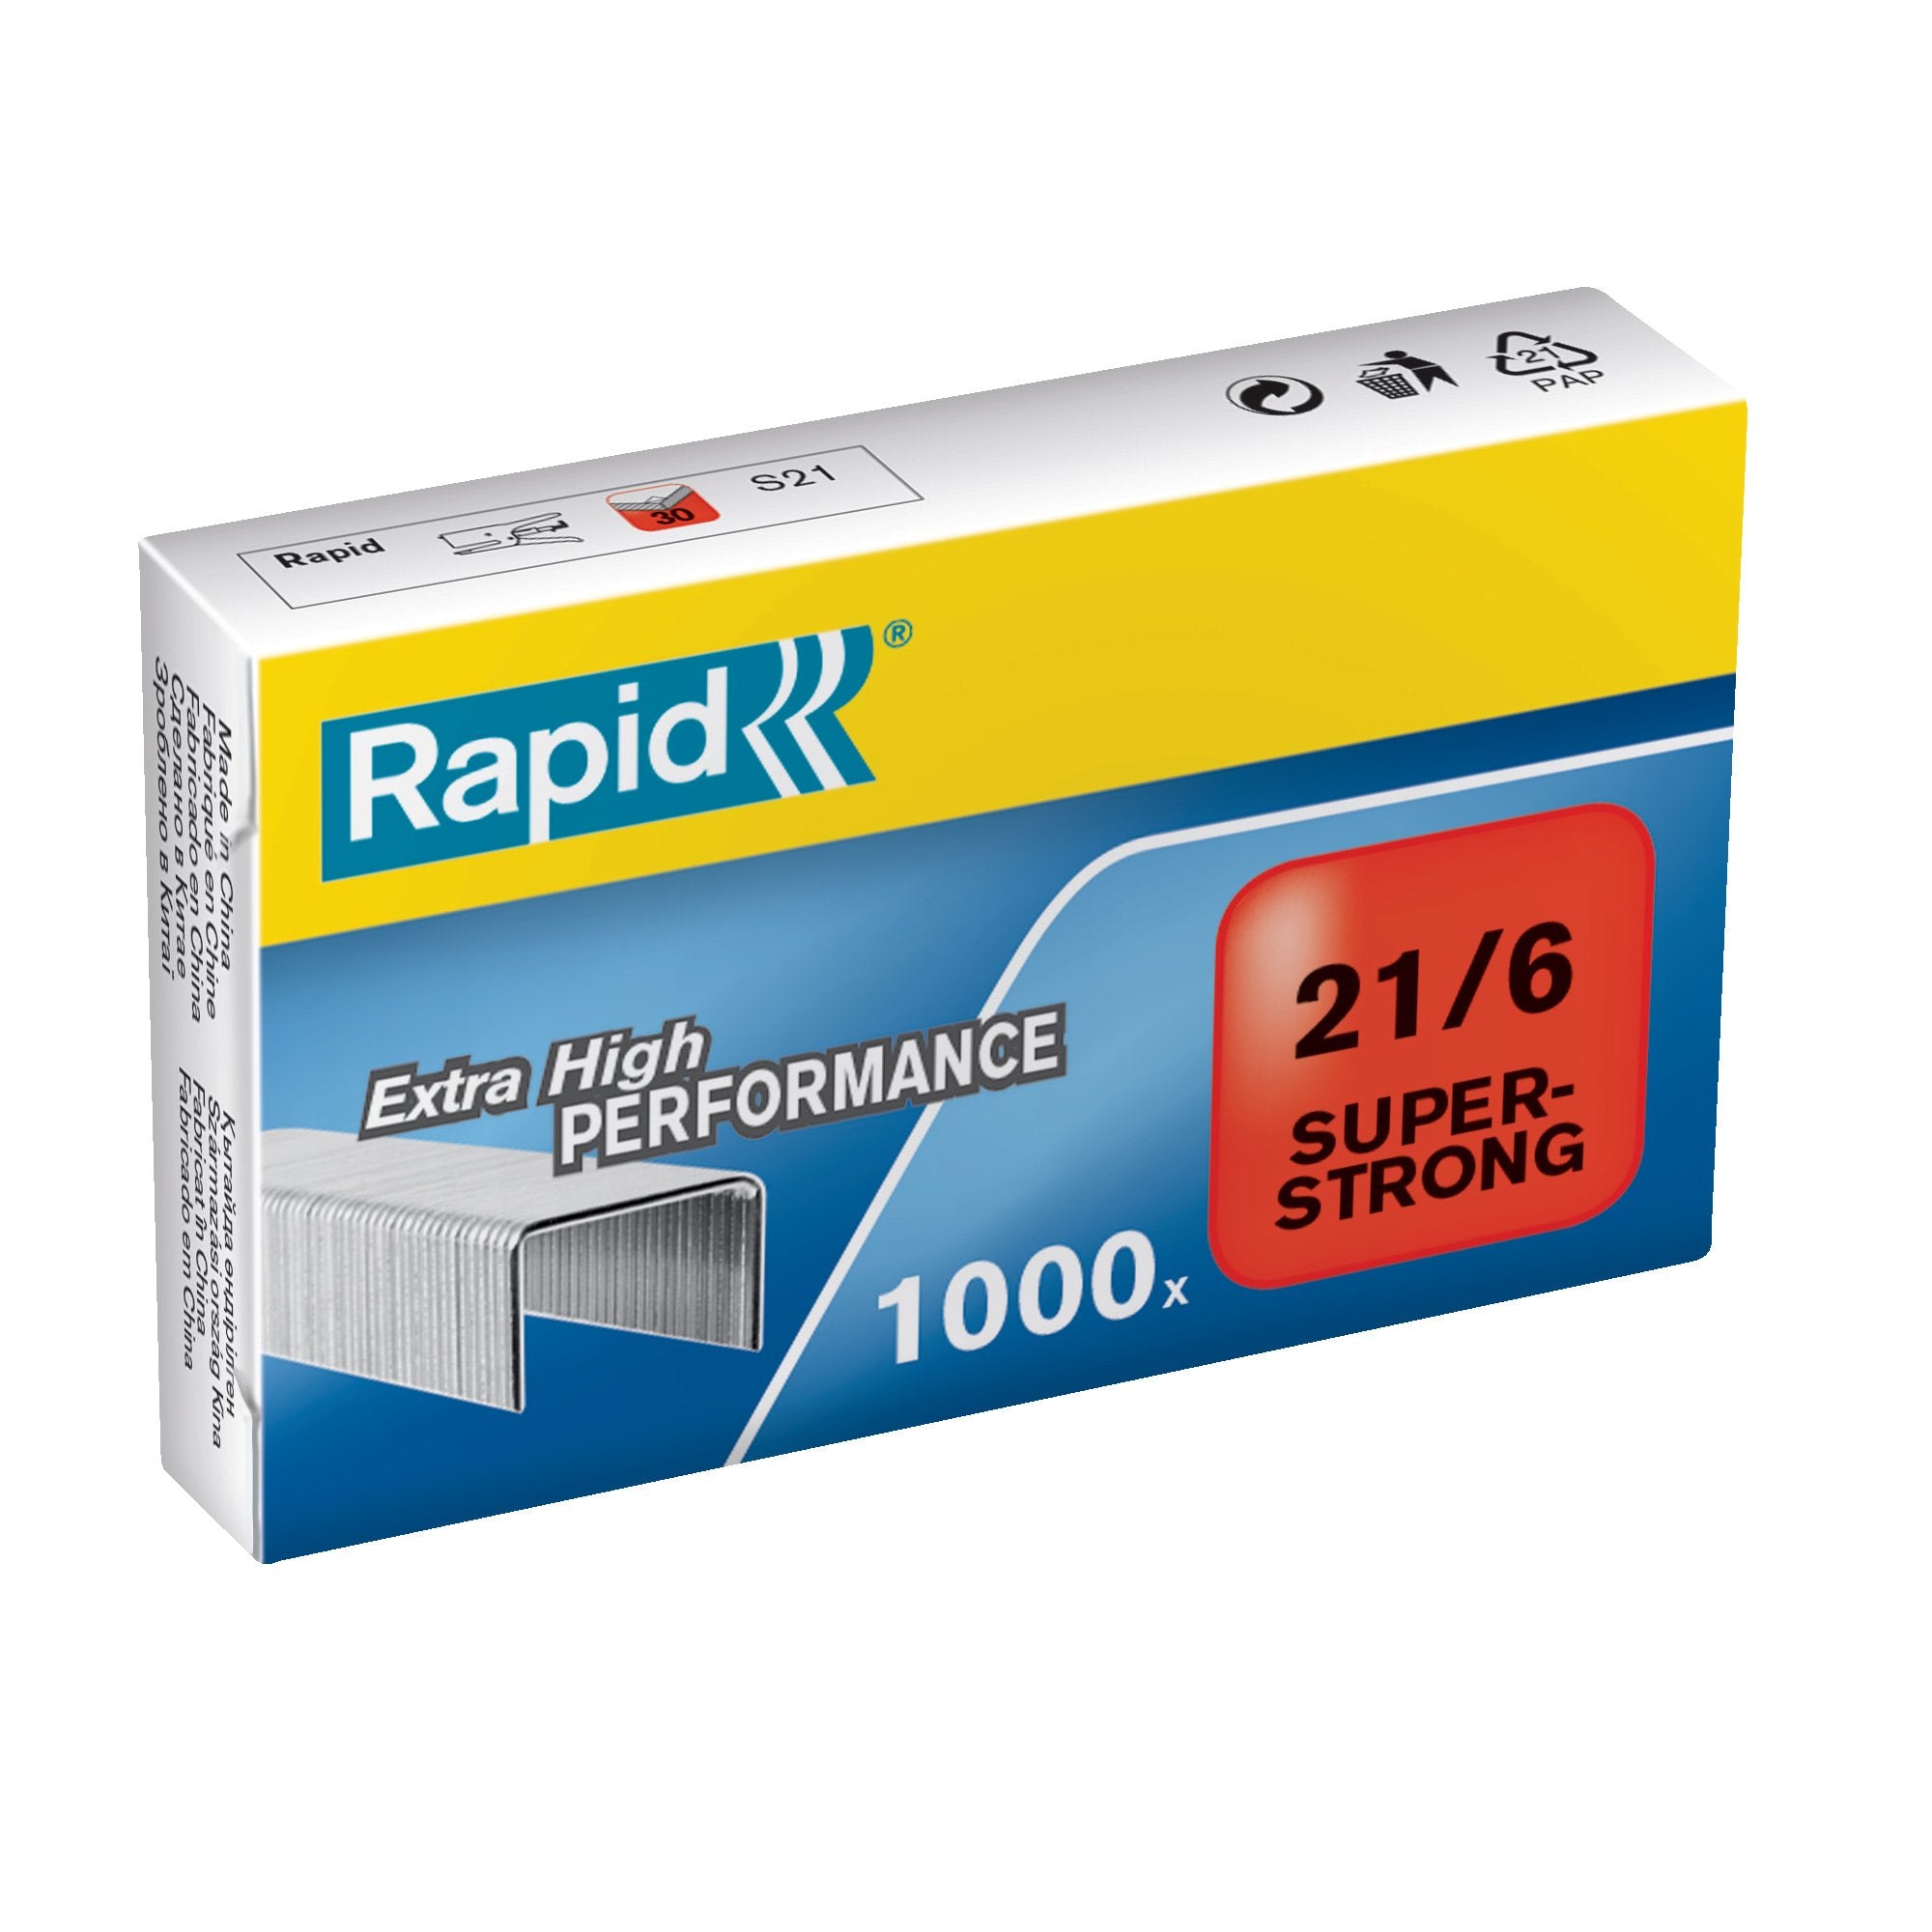 rapid-scatola-1000-punti-super-strong-21-6-6-6